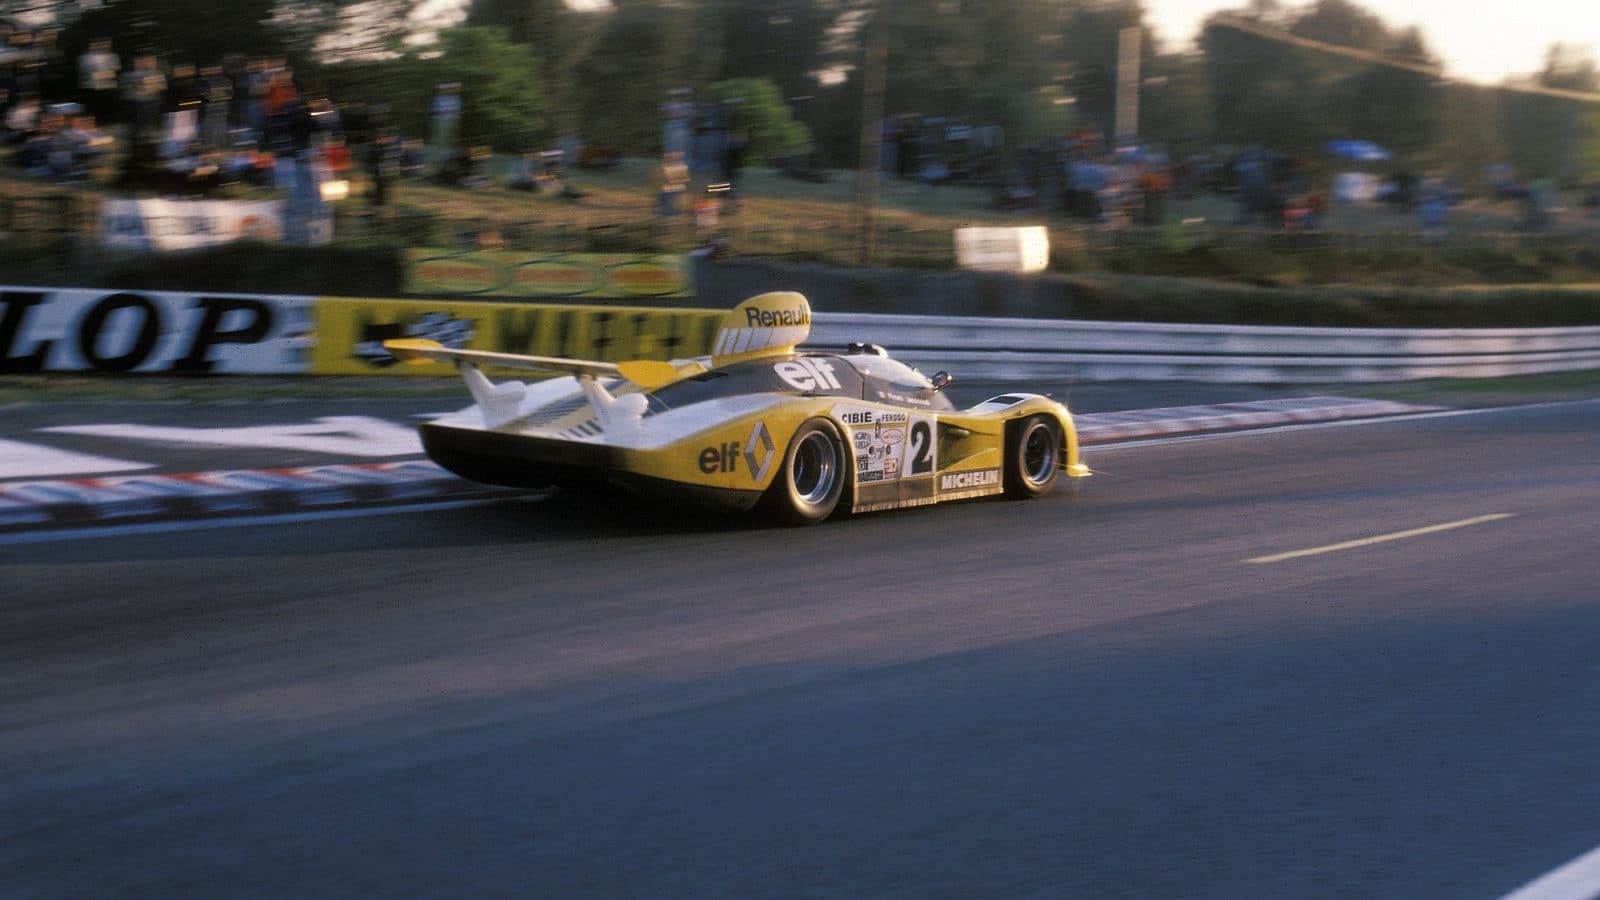 Pironi Jaussaud Alpine Renault in the Le Mans 24 Hours 1978